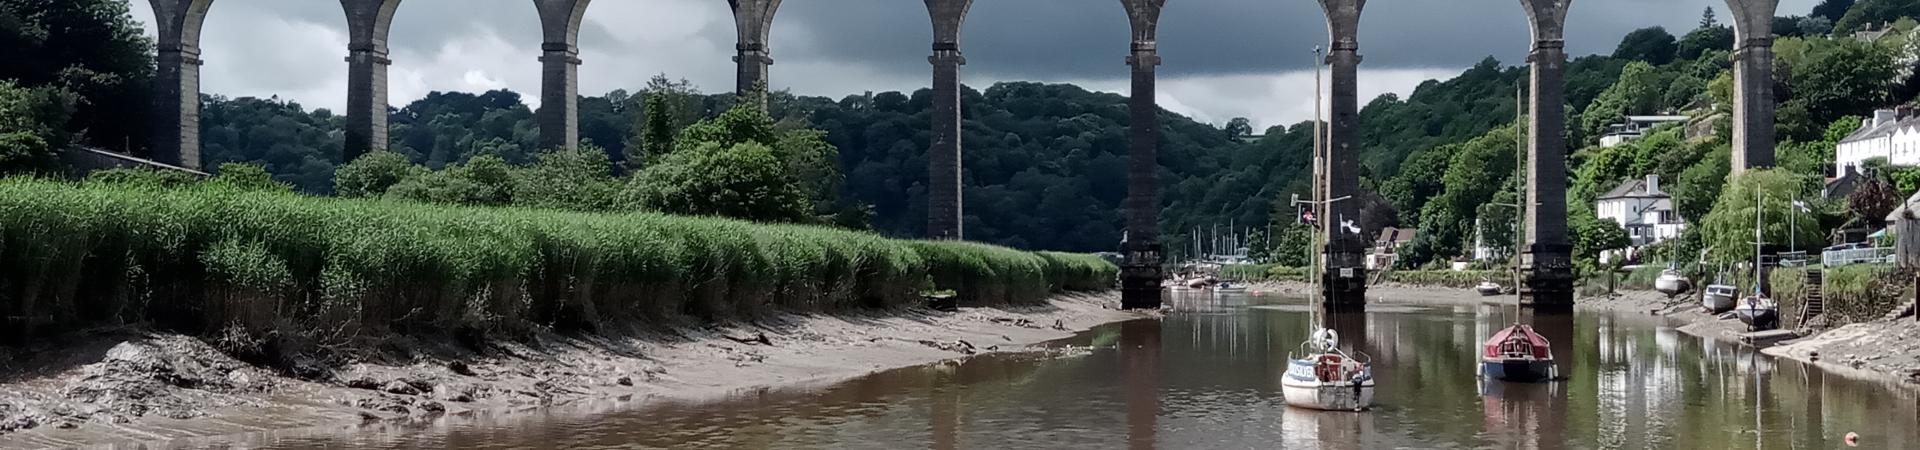 Calstock Viaduct over the River Tamar